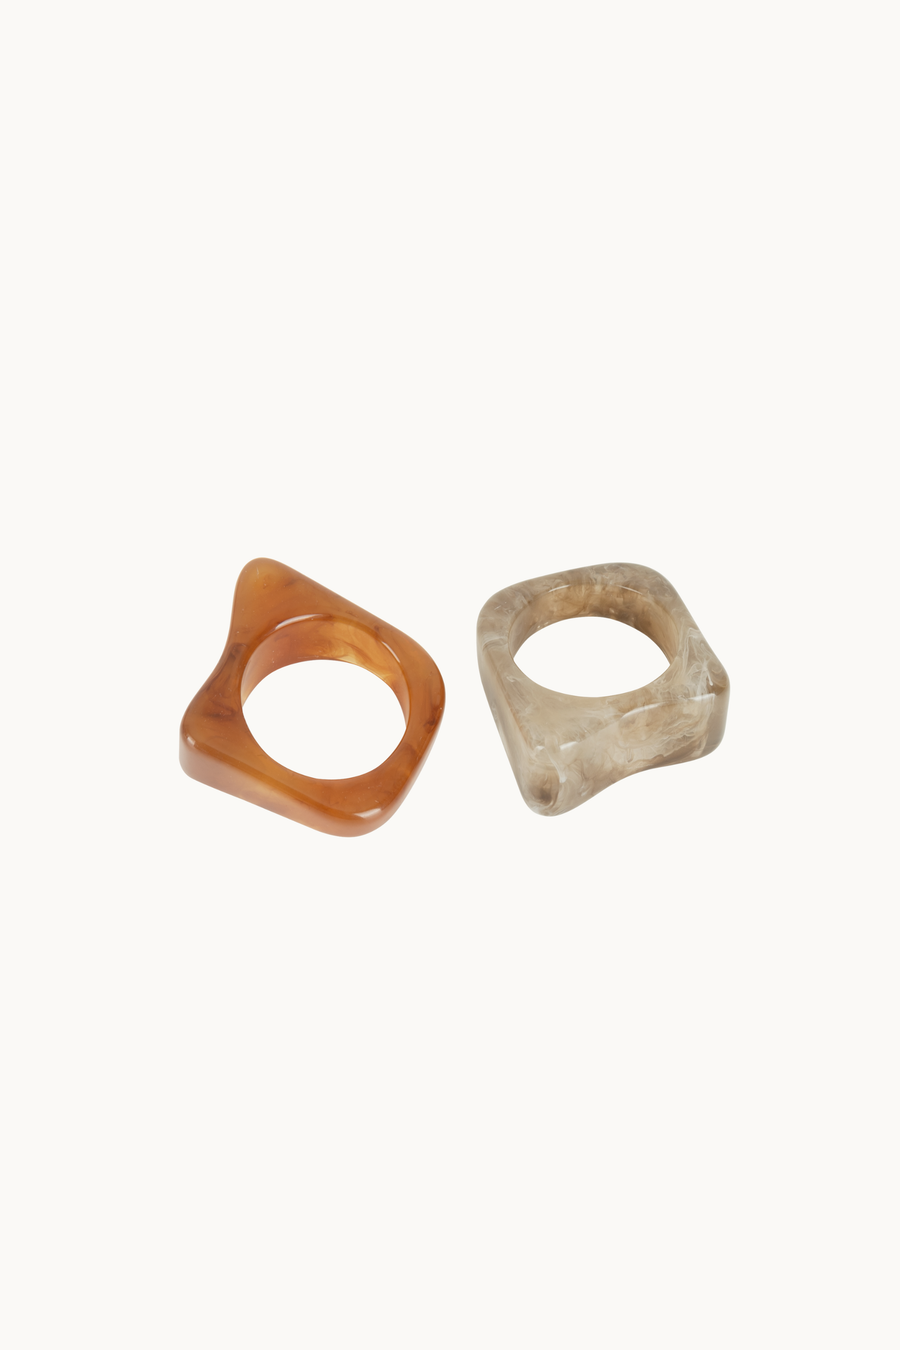 JENNY Rings (Pack of Two)